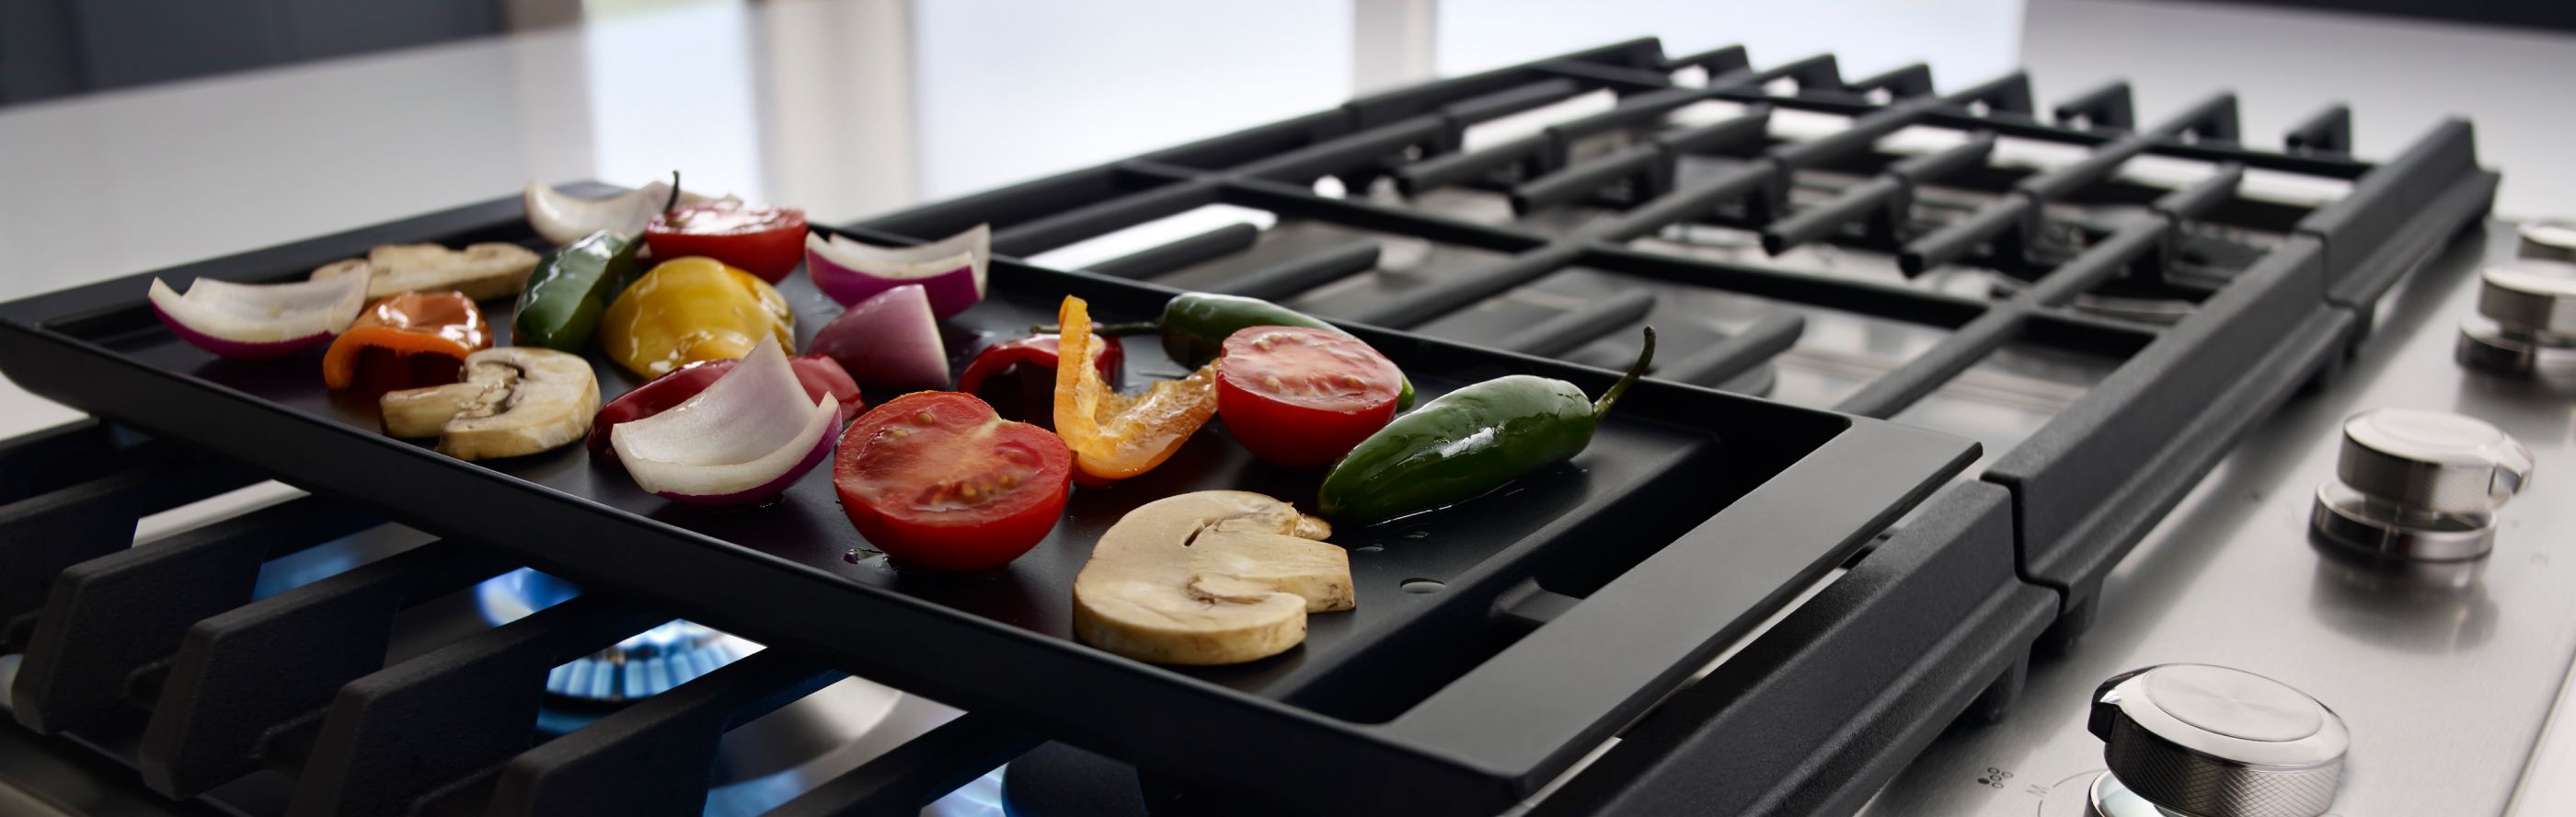 Vegetables cooking on a gas stove griddle